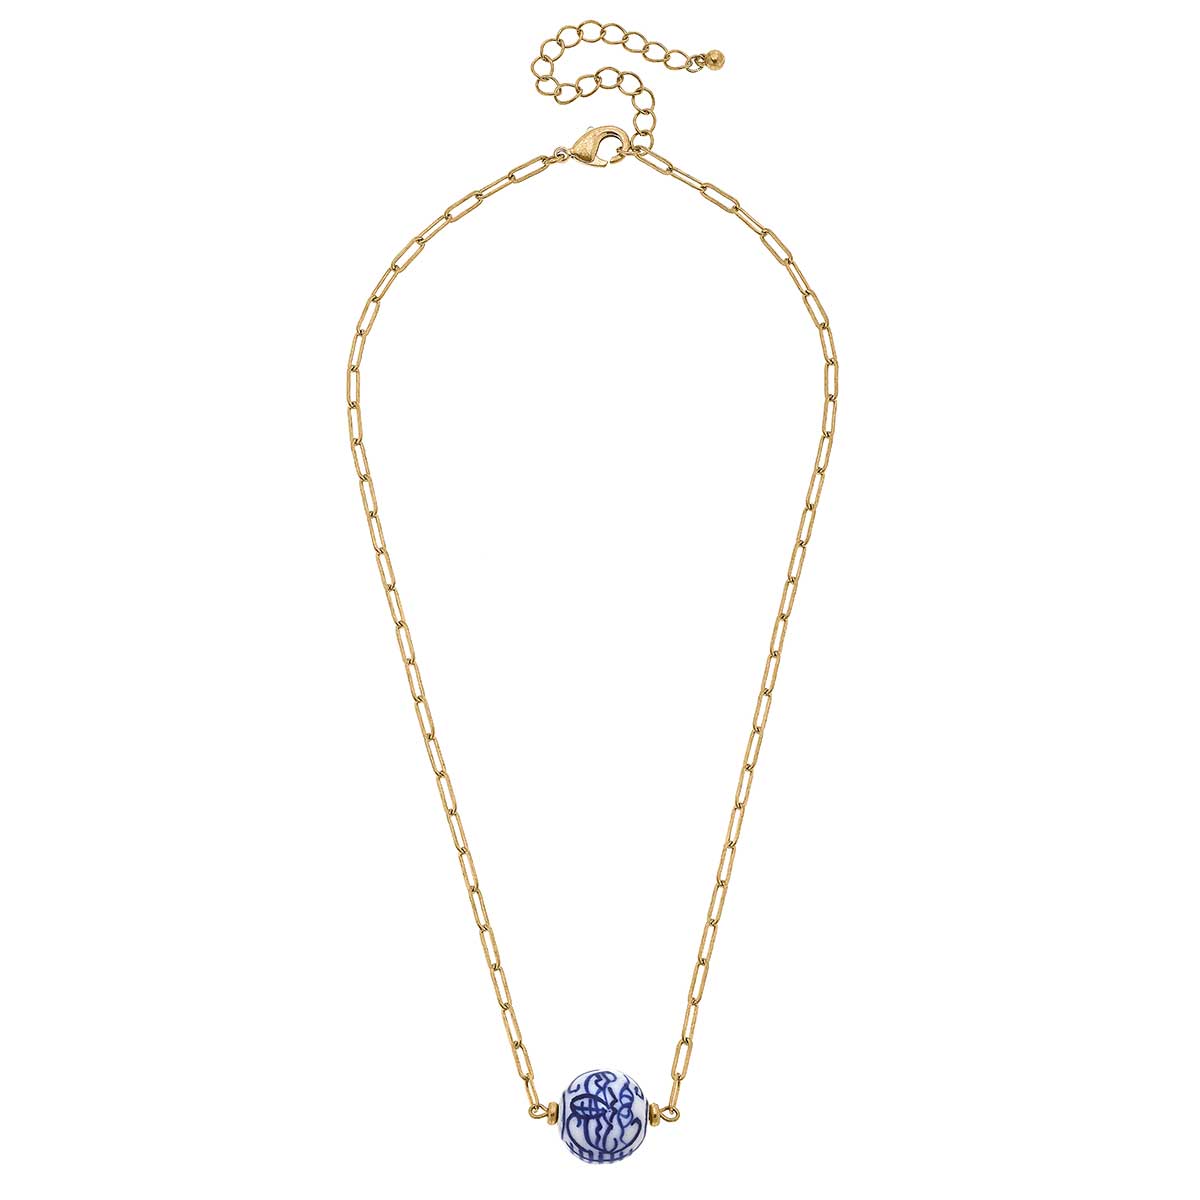 Willow Chinoiserie Necklace in Blue & White